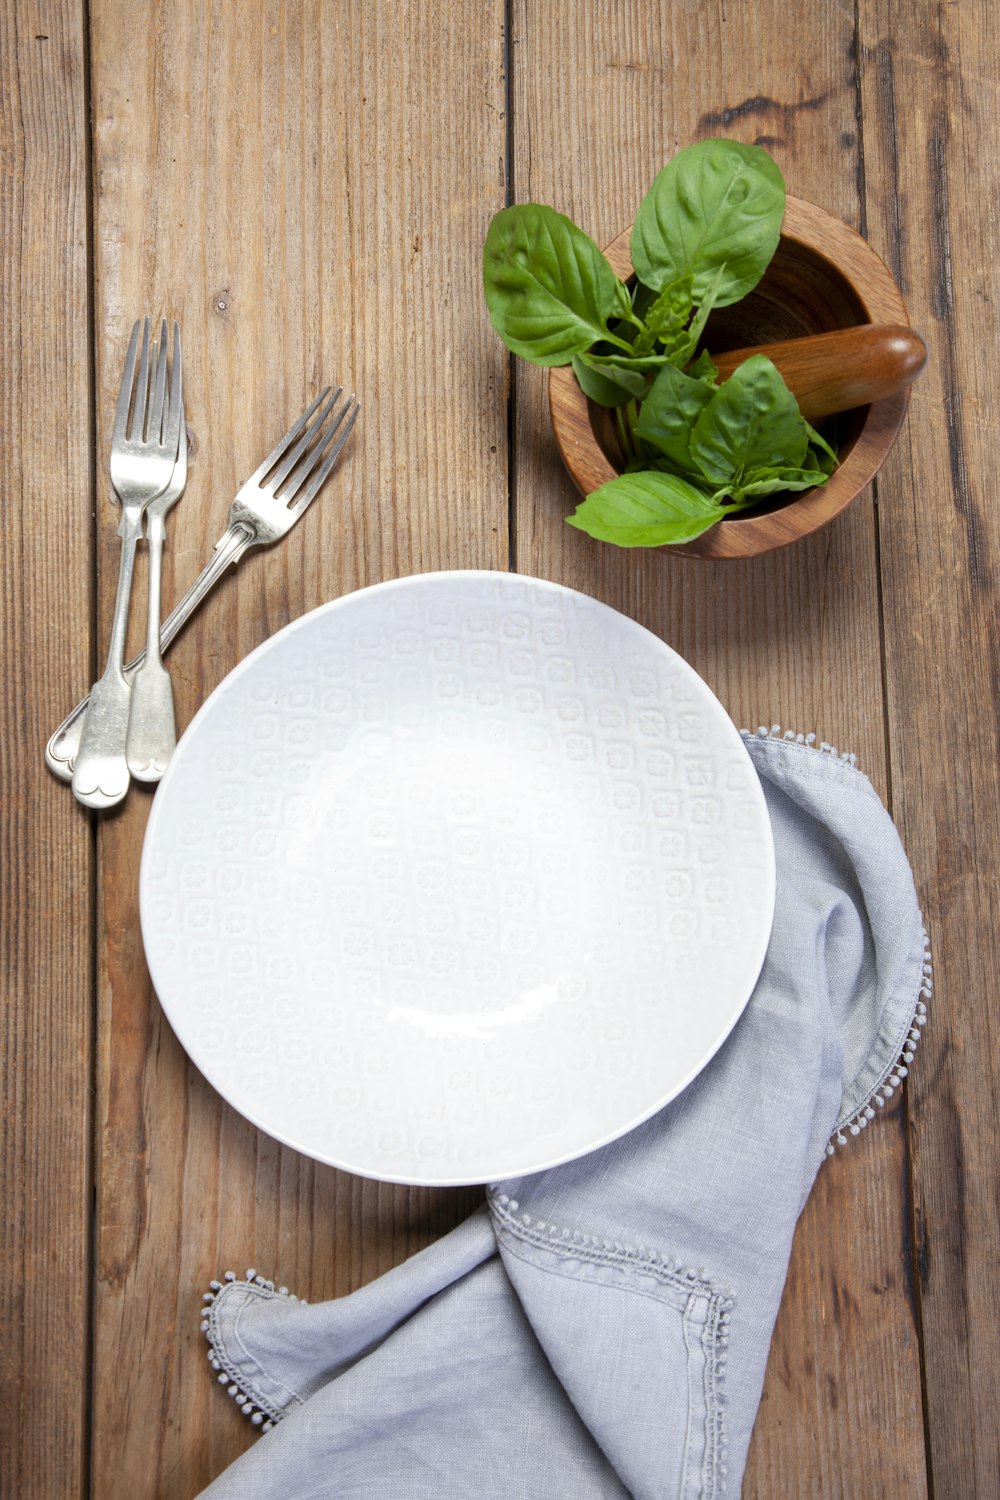 white ceramic plate beside stainless steel fork and bread knife